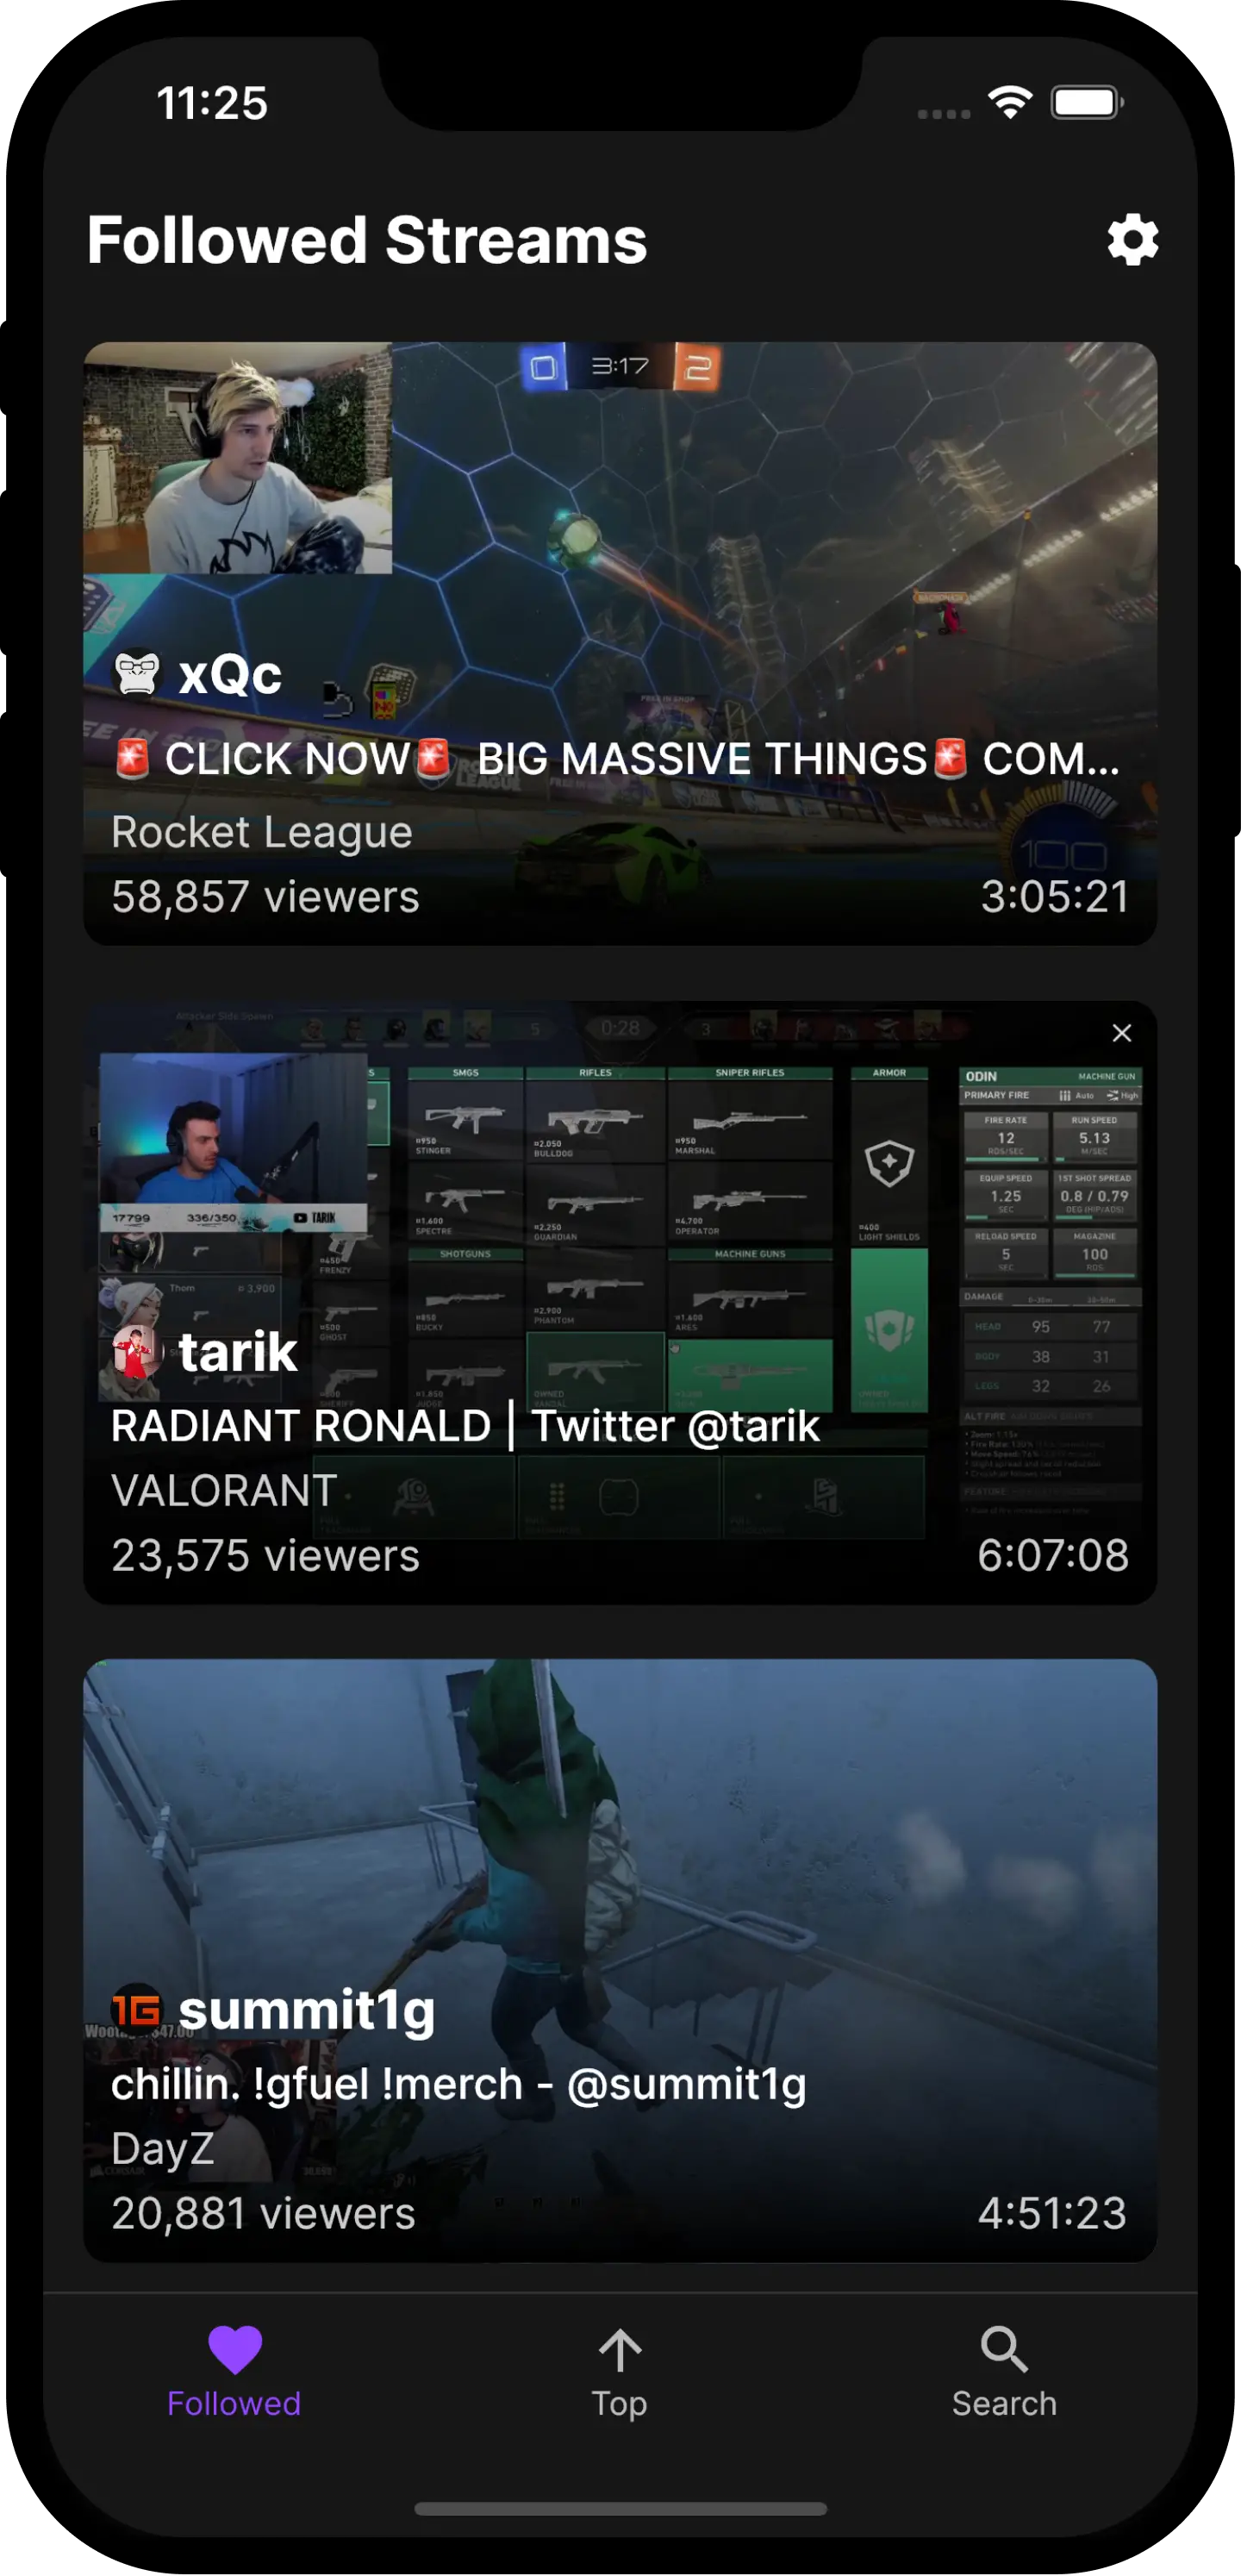 Screenshot of the followed streams tab, showing a list of live channels with thumbnails and stream details.